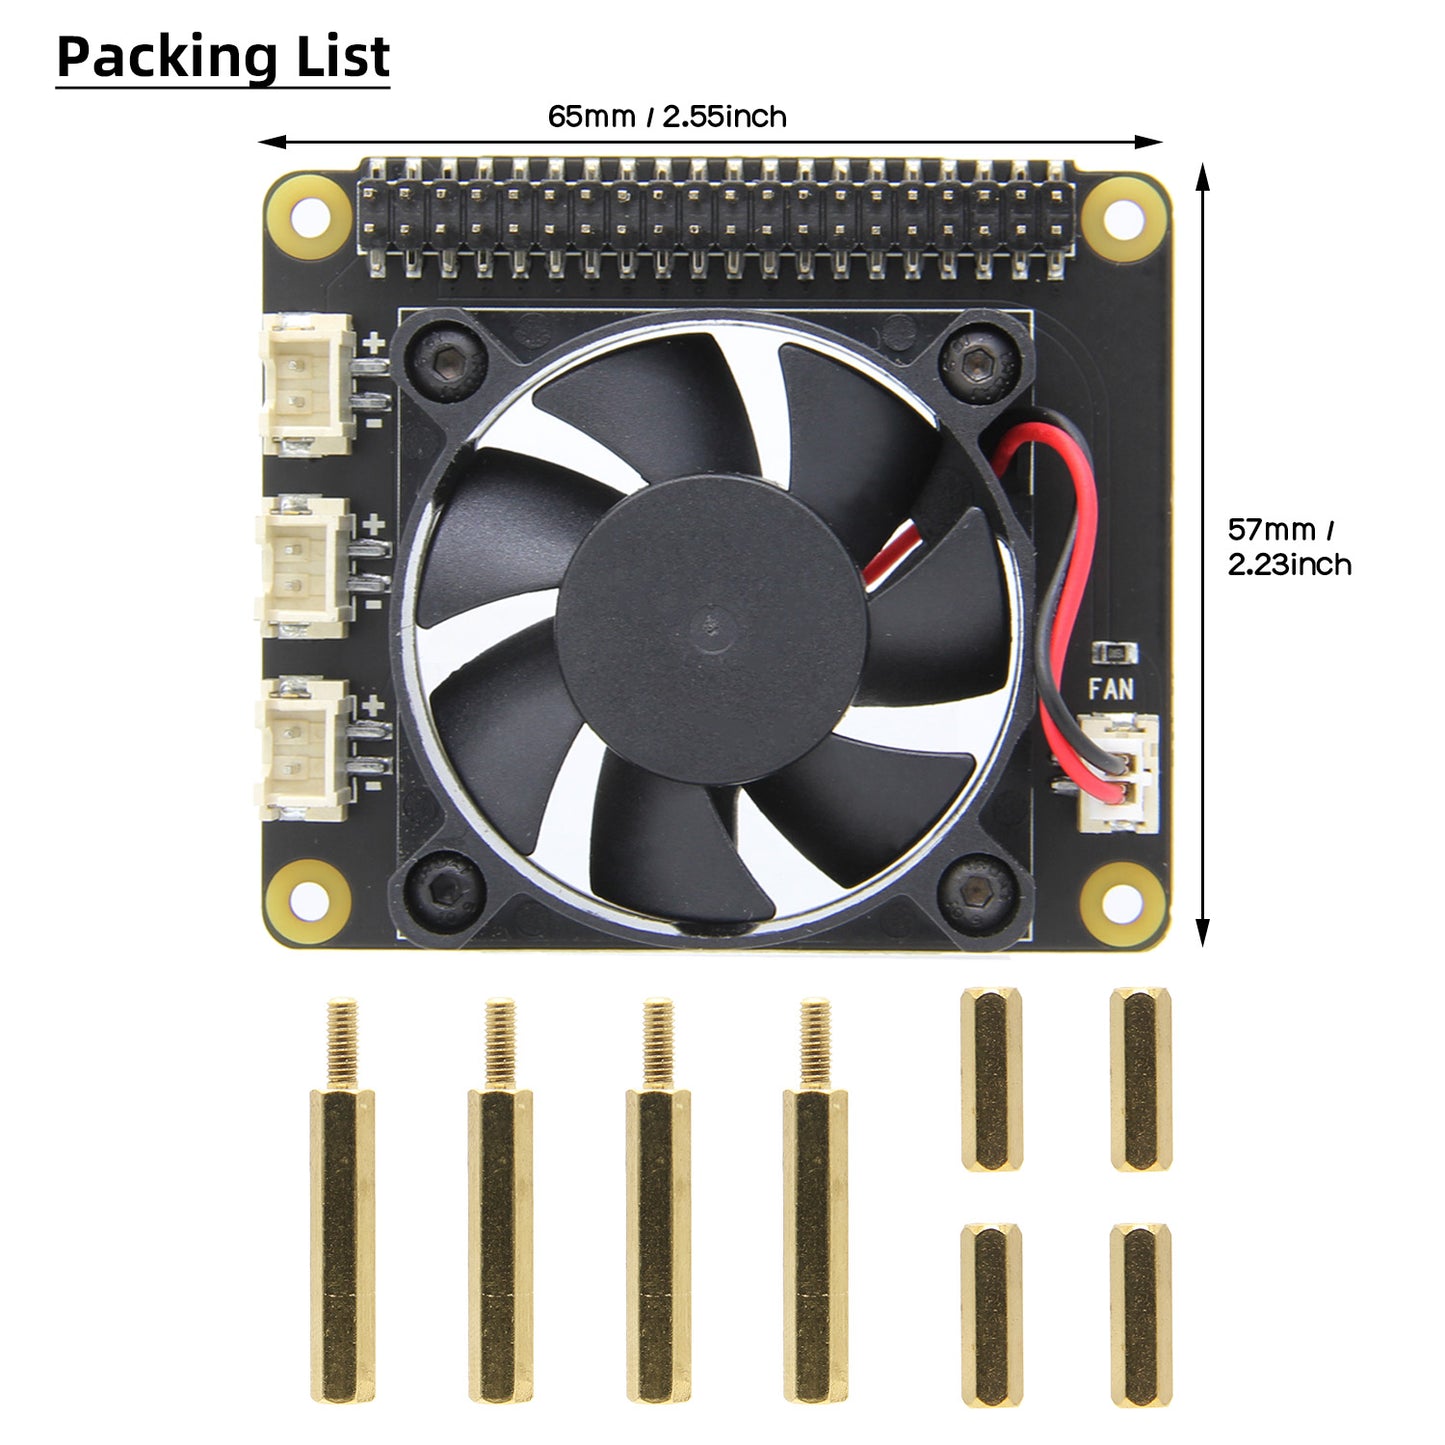 Raspberry Pi 4 Model B Cooling Fan Expansion Board with Silent fan, compatible with Raspberry pi 4 model B / 3B+/2B  (X728-A1)